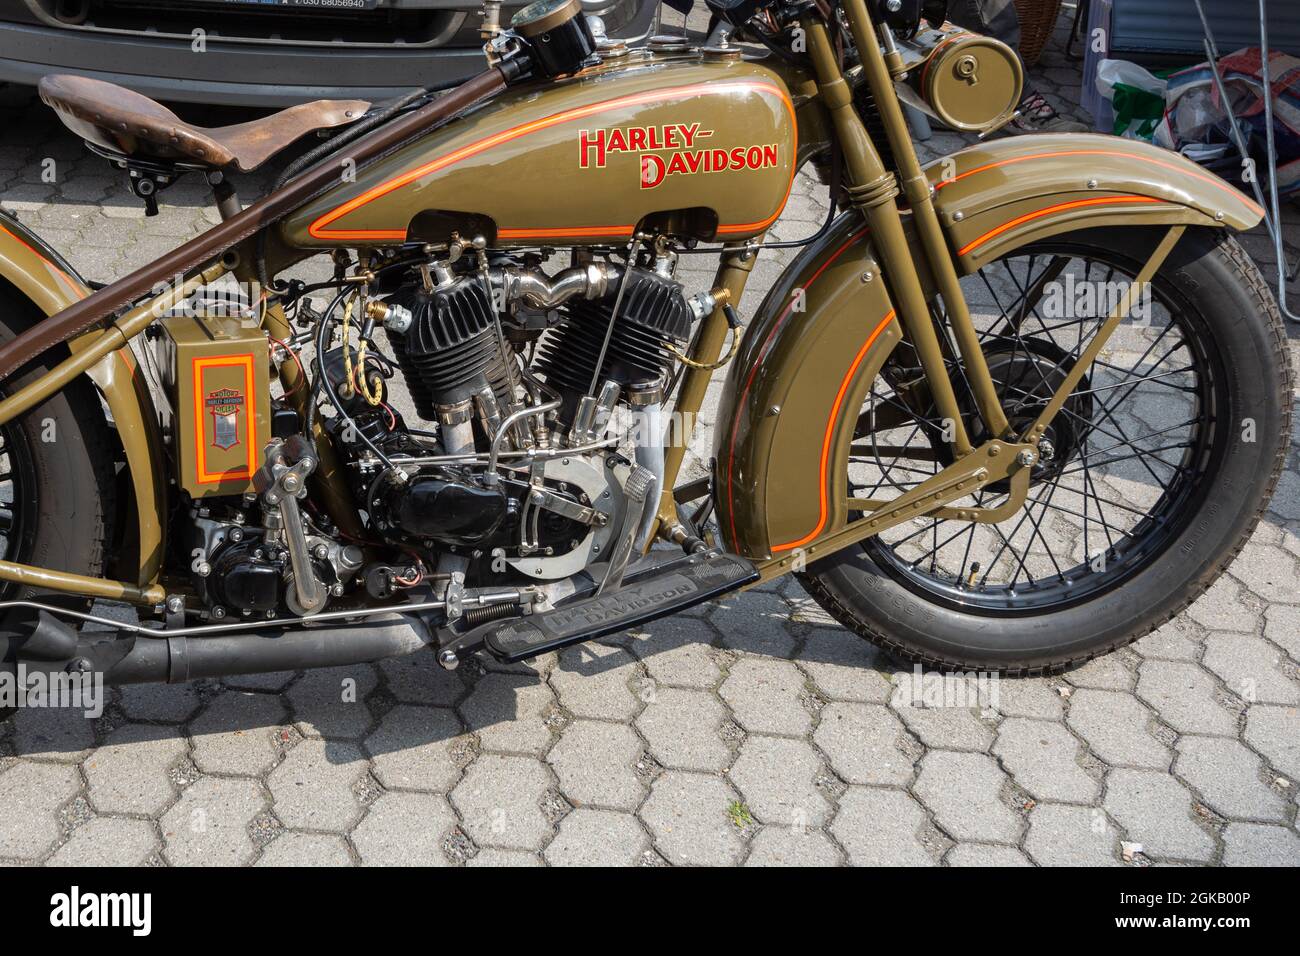 Harley Davidson JD from 1928 in a very good restored condition - view from  the side Stock Photo - Alamy